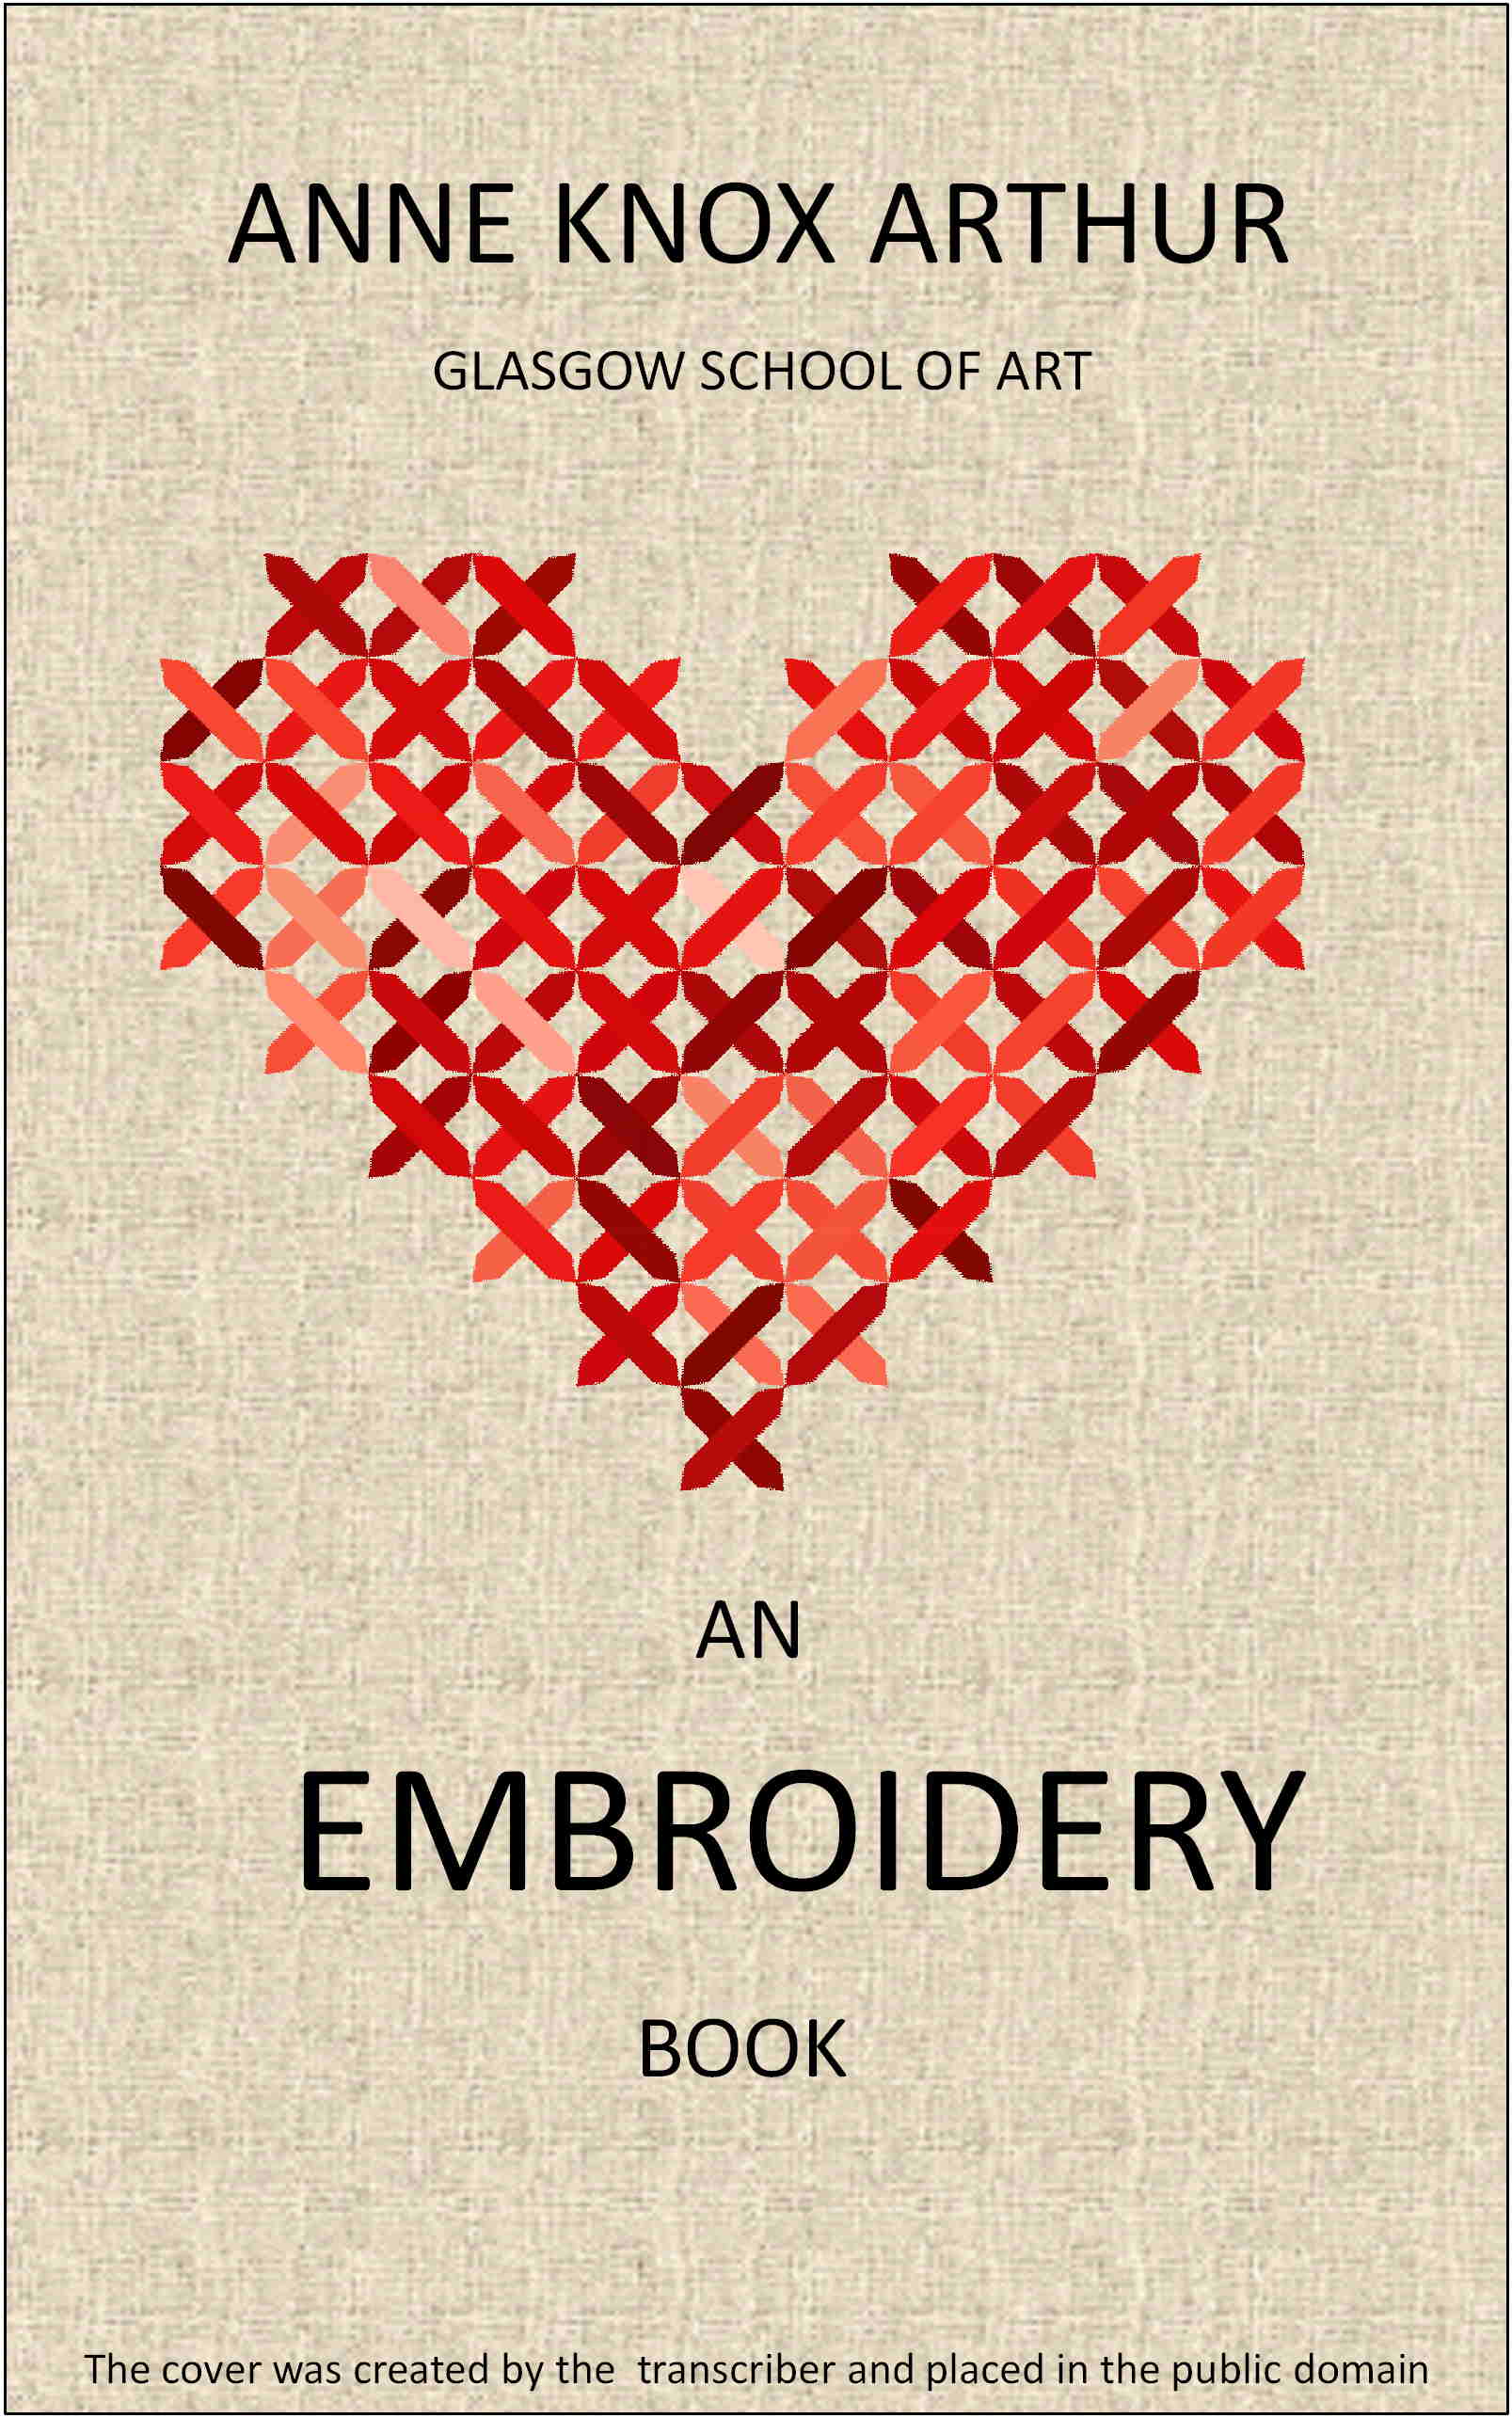 An embroidery book